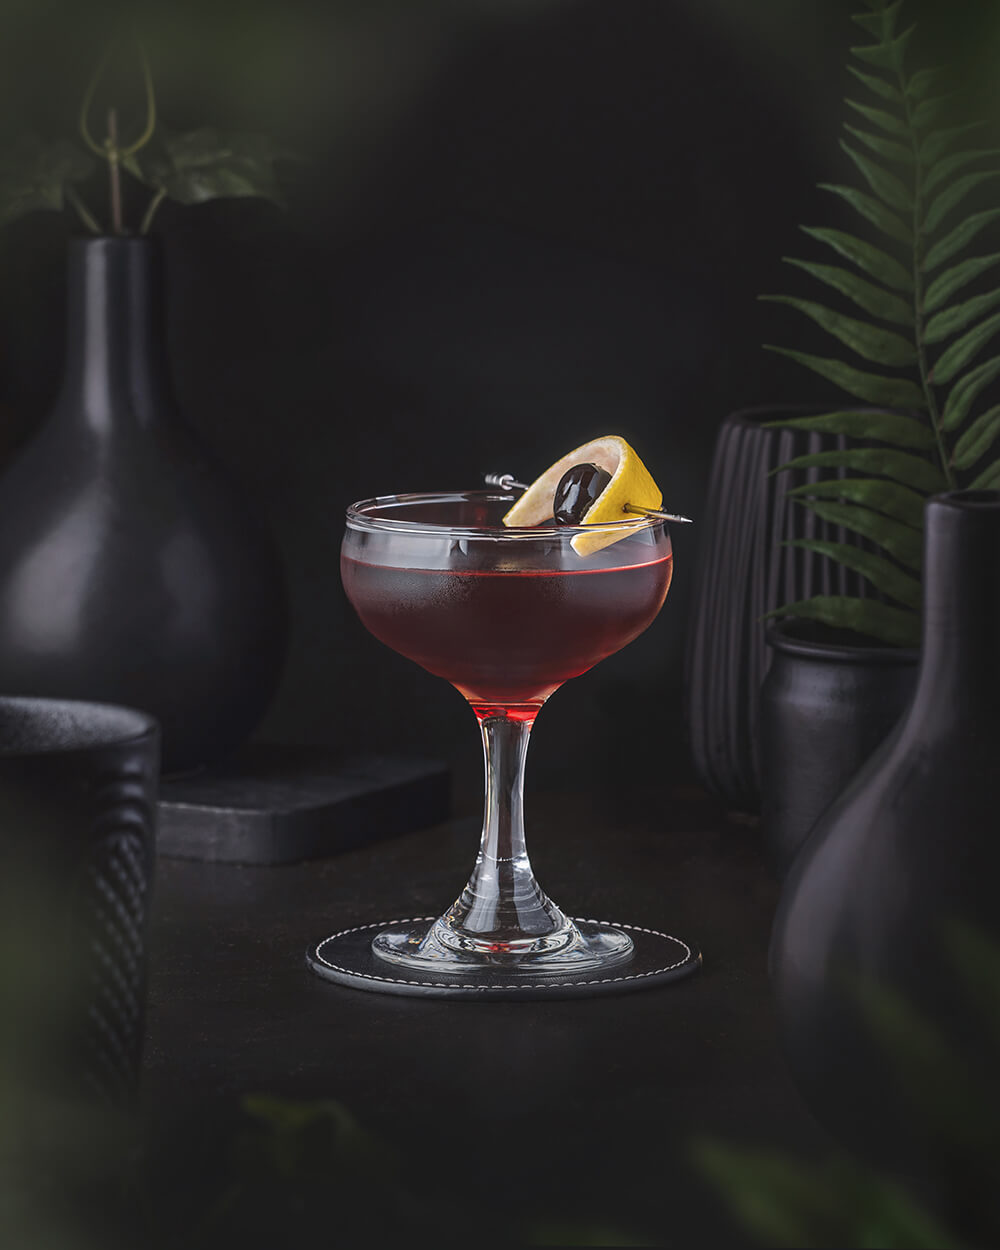 Bobby Burns - Deep red short drink made with blended scotch, sweet vermouth and benedictine. Garnished with a maraschino cherry or lemon zest.